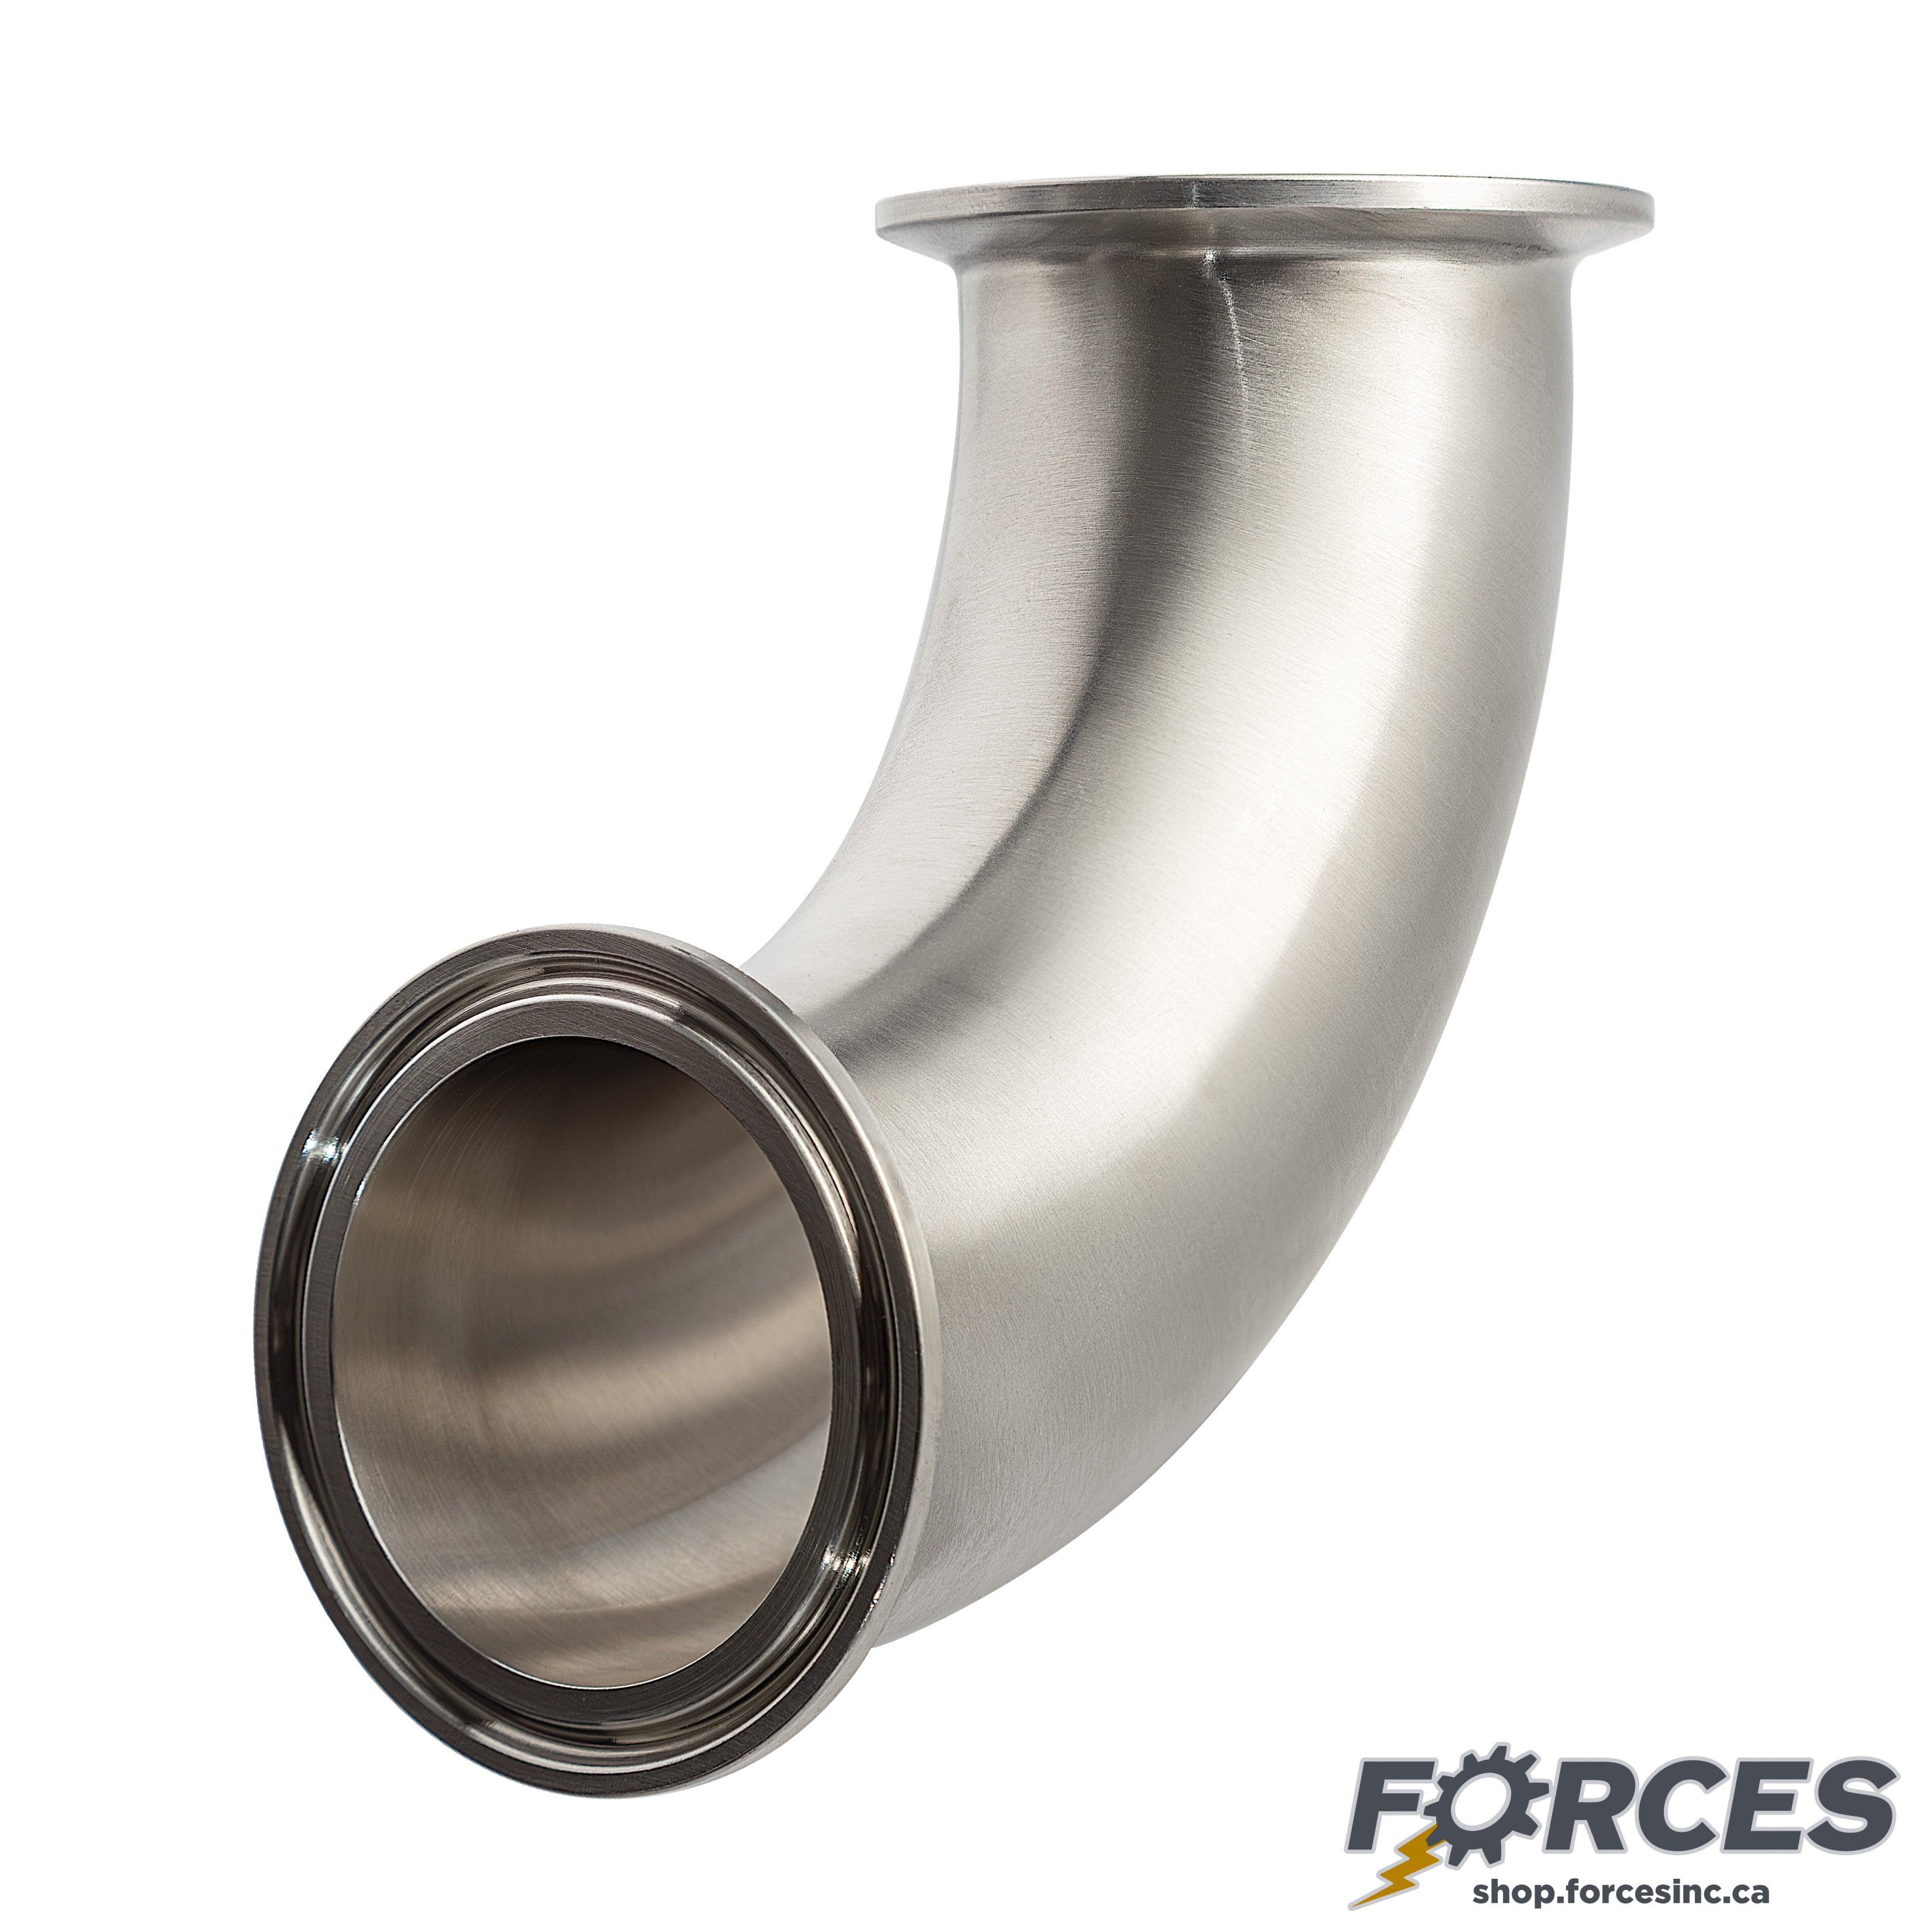 8" Tri-Clamp 90° Elbow - Stainless Steel 316 - Forces Inc